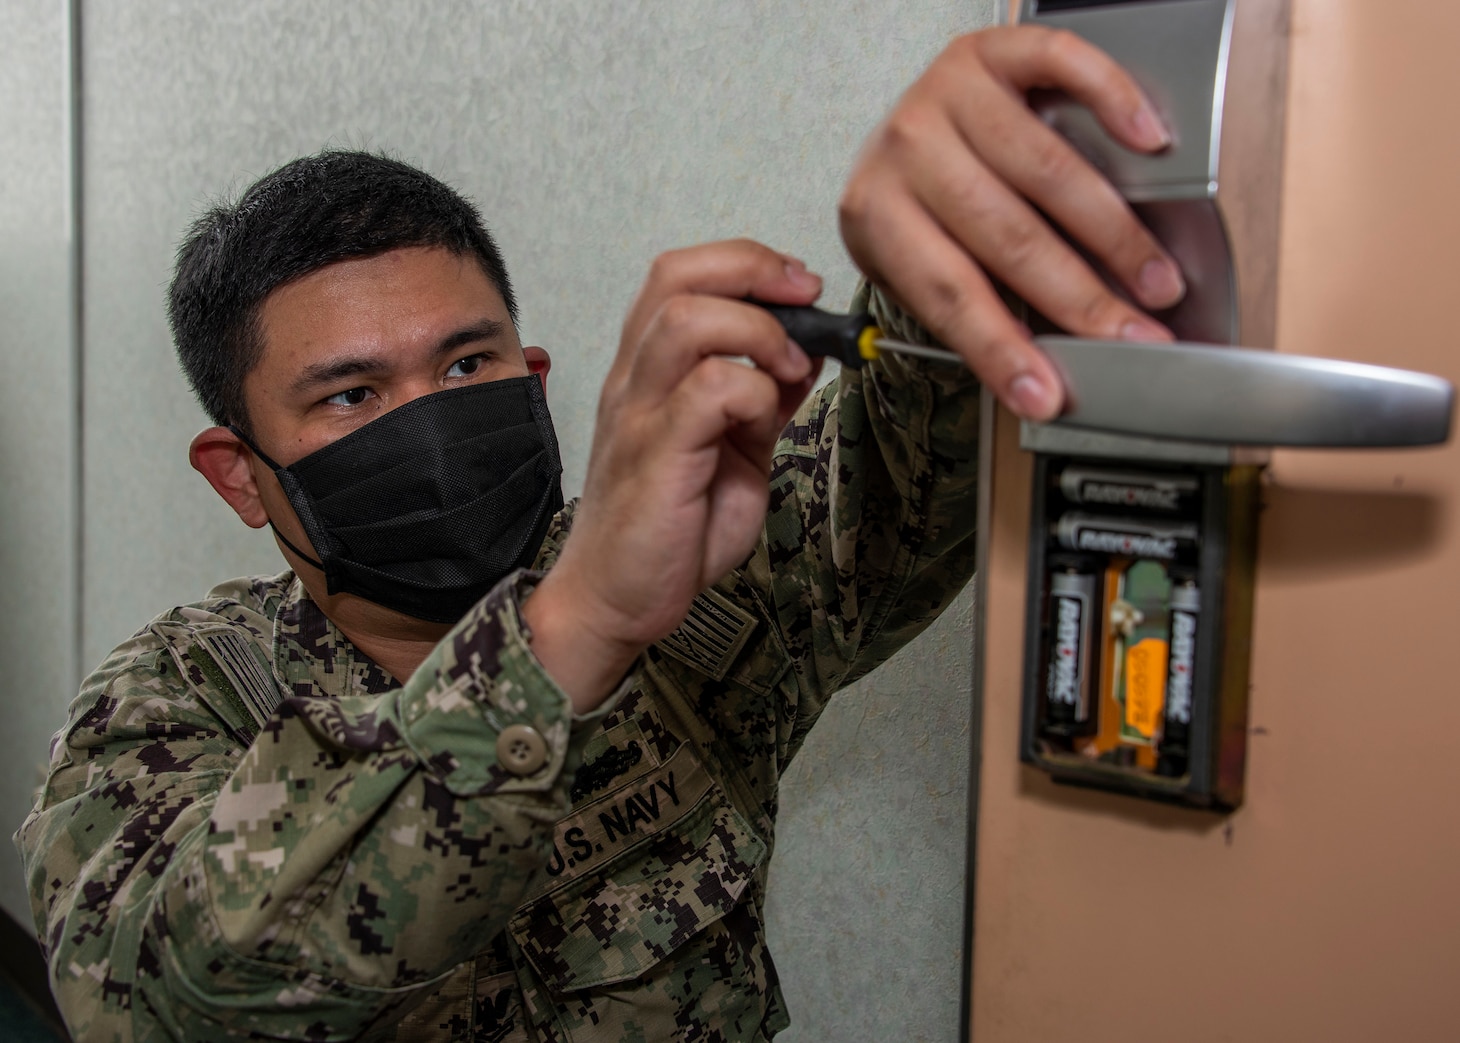 Culinary Specialist 2nd Class Jonathan Tongsen repairs a barracks bedroom door in building 1289 in preparation for new residents onboard Naval Air Facility (NAF) Atsugi.